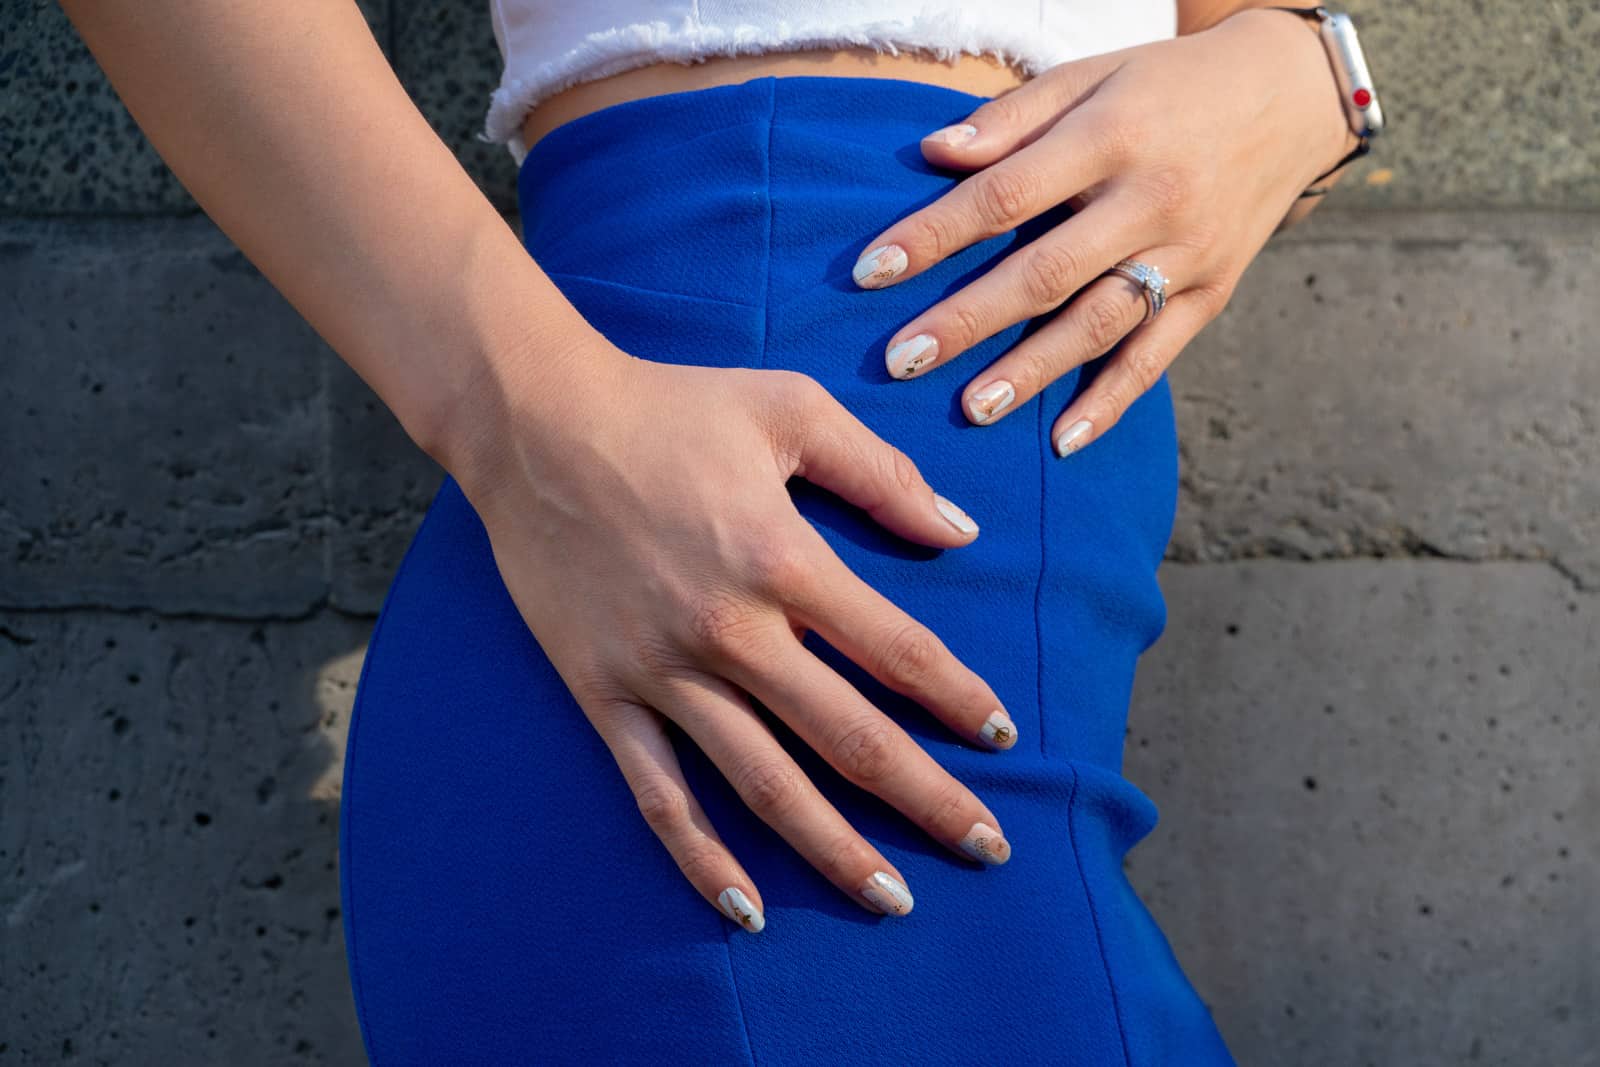 Close shot of a woman’s hands at the side of her hip. She has pastel nail art on her fingernails and is wearing a figure hugging blue skirt